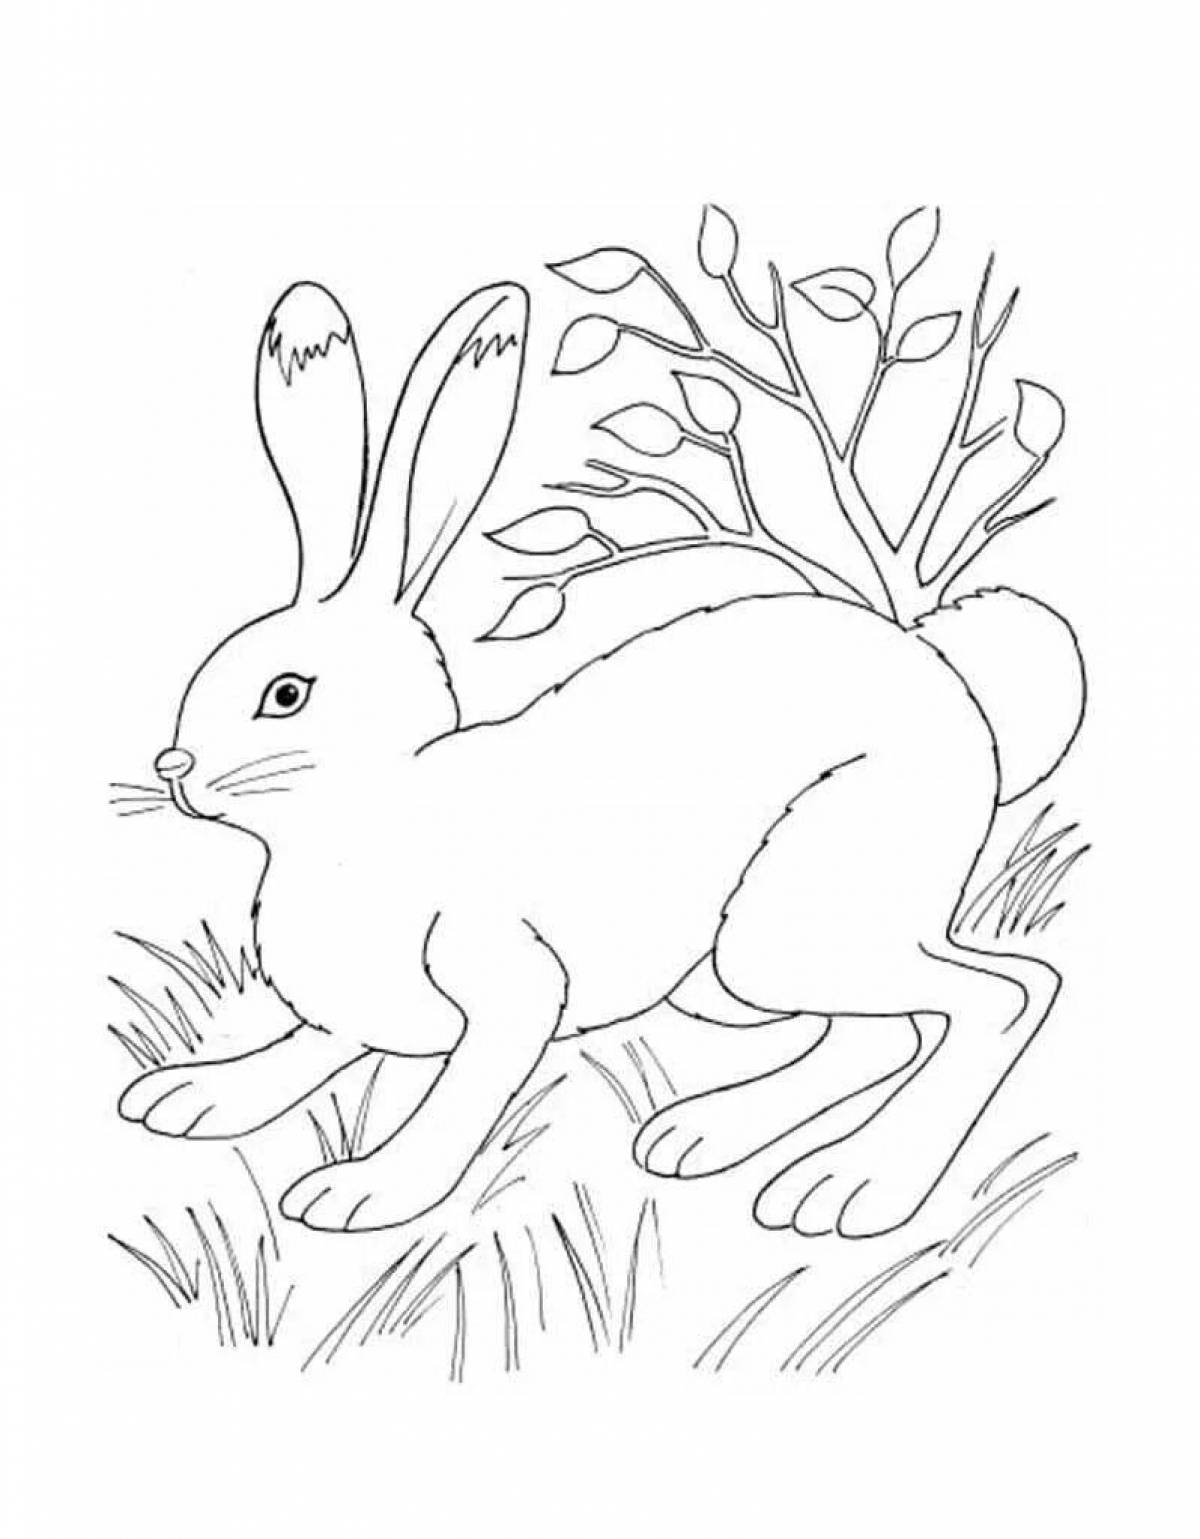 The most cunning hare in the forest